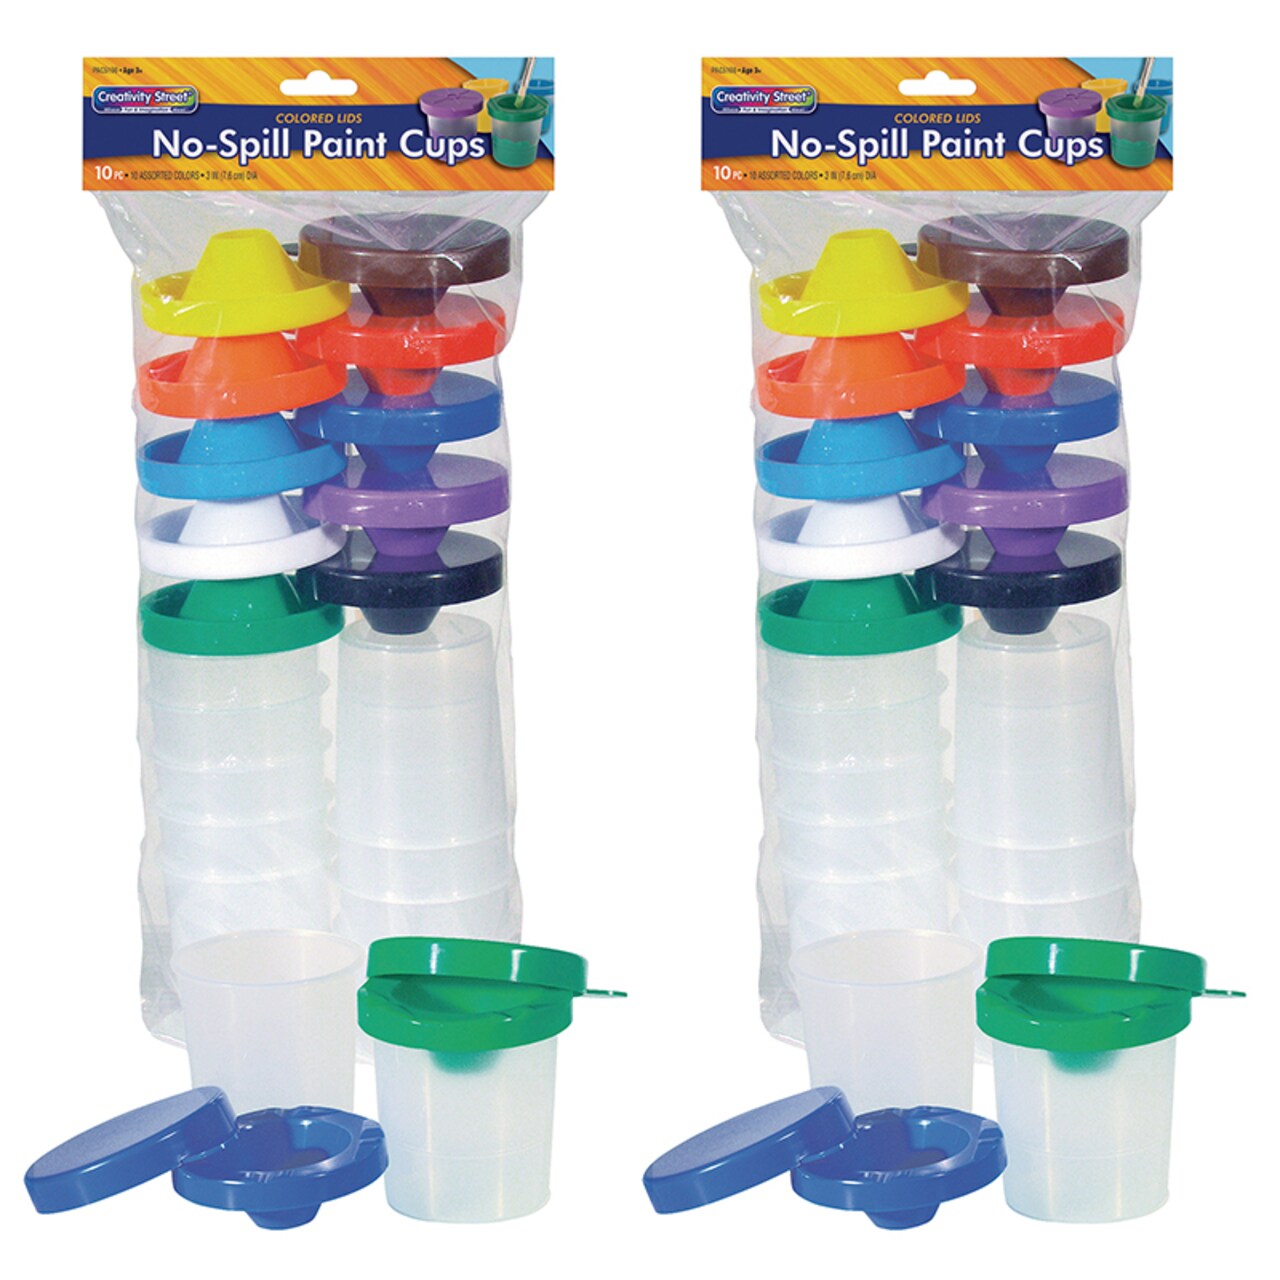 No-Spill Round Paint Cups With Colored Lids, 3 Dia., 10 Per Pack